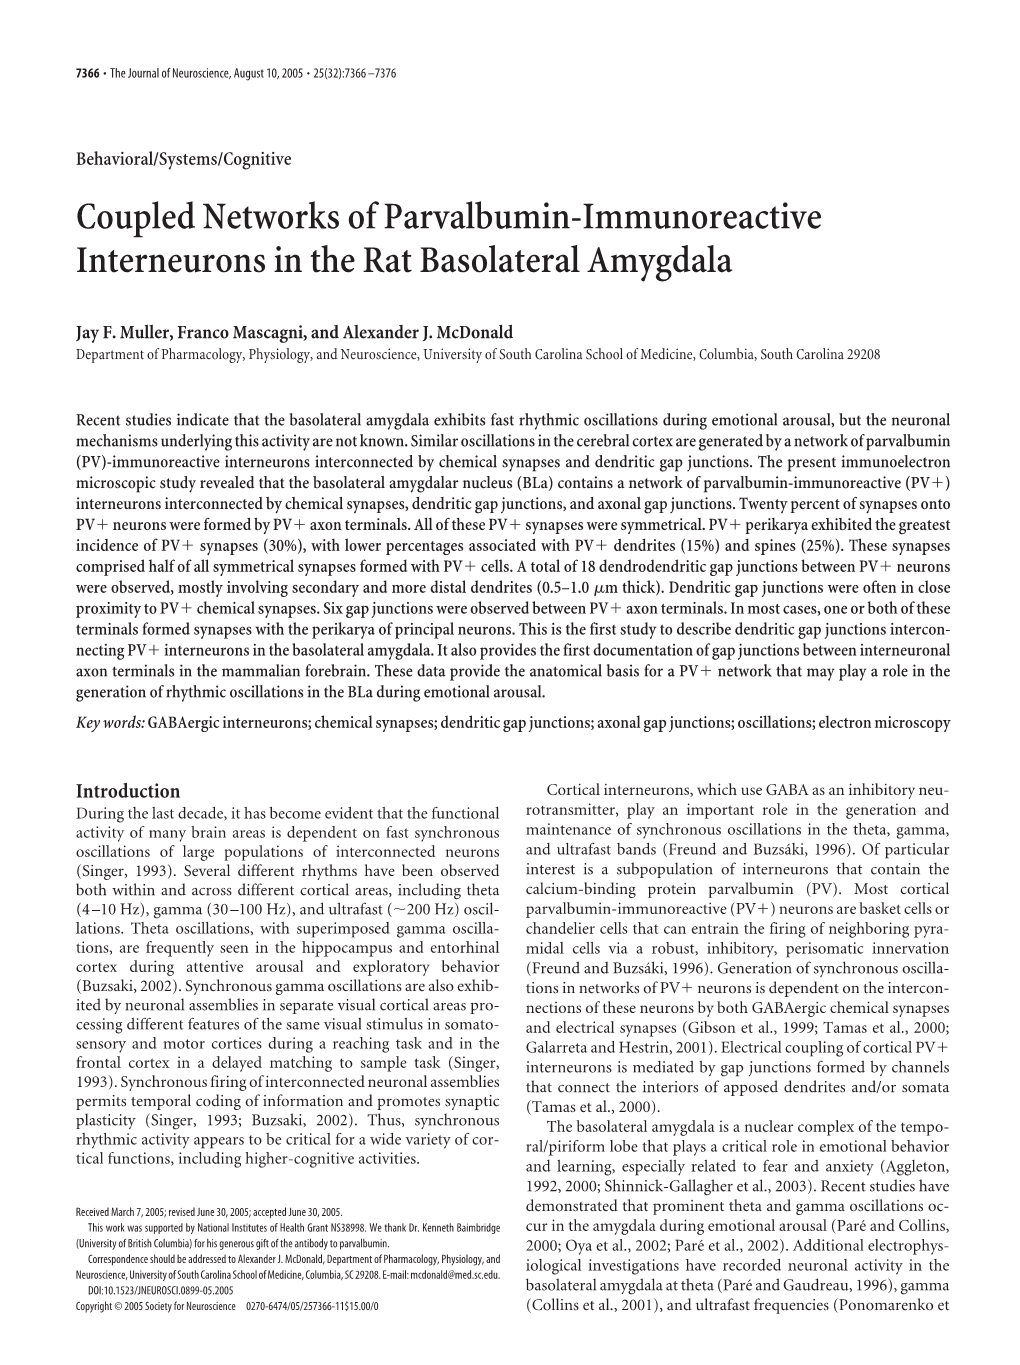 Coupled Networks of Parvalbumin-Immunoreactive Interneurons in the Rat Basolateral Amygdala